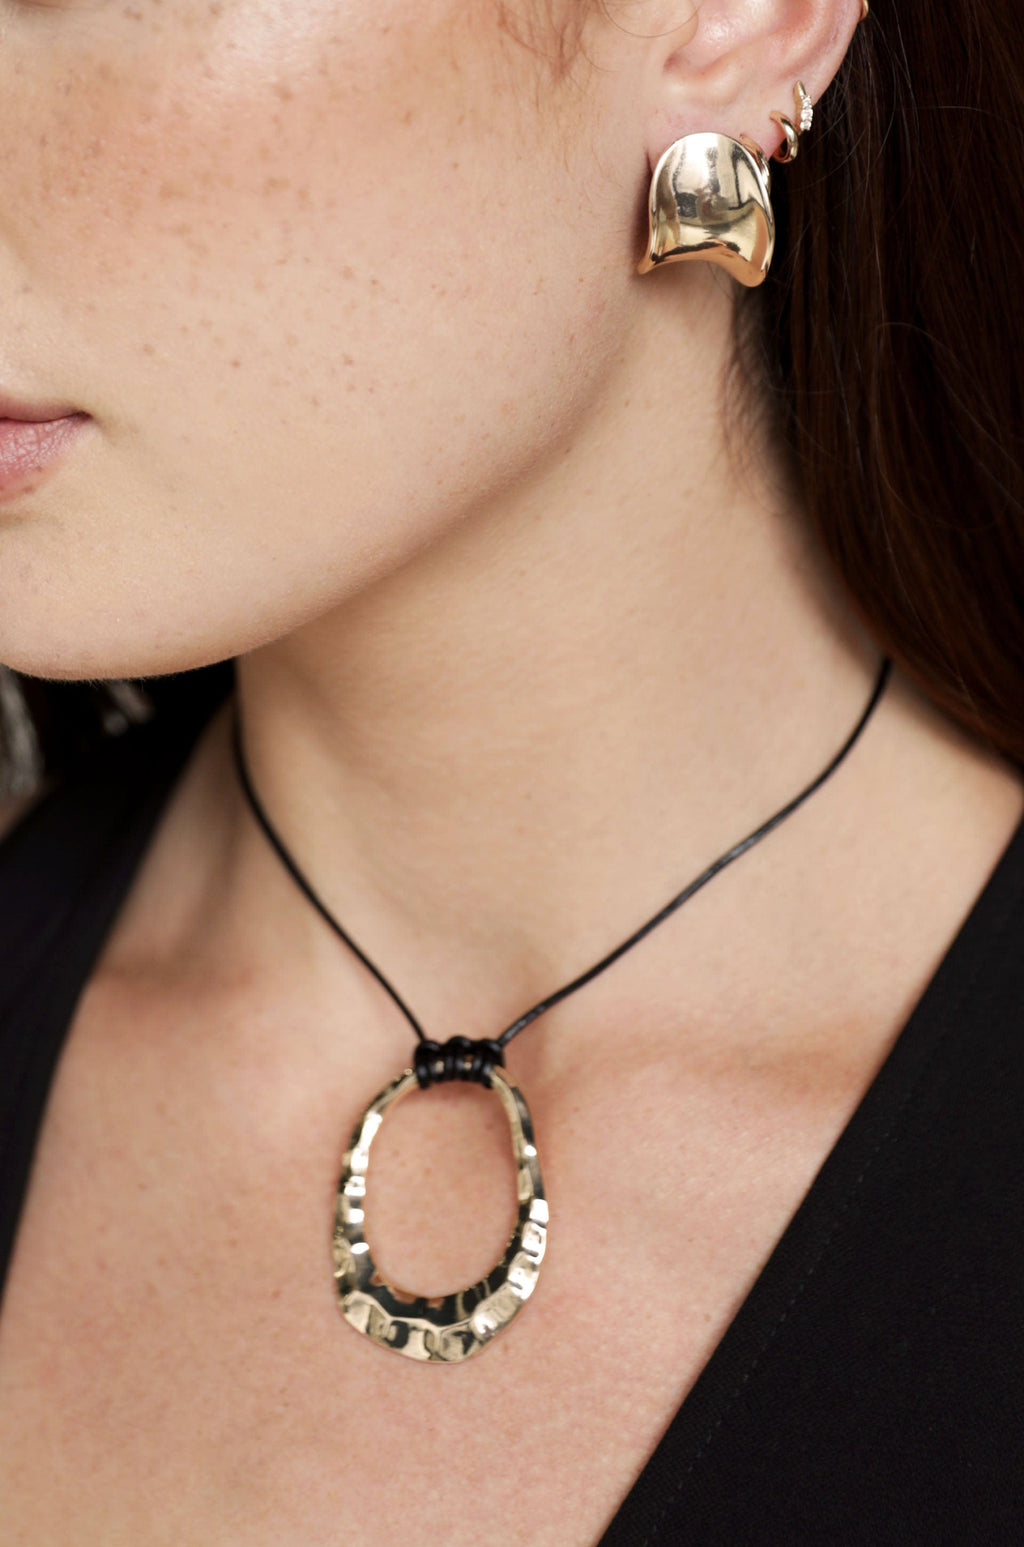 Ettika Necklaces Black Leather / One Size Hammered Golden Loop Pendant 18k Gold Plated Necklace